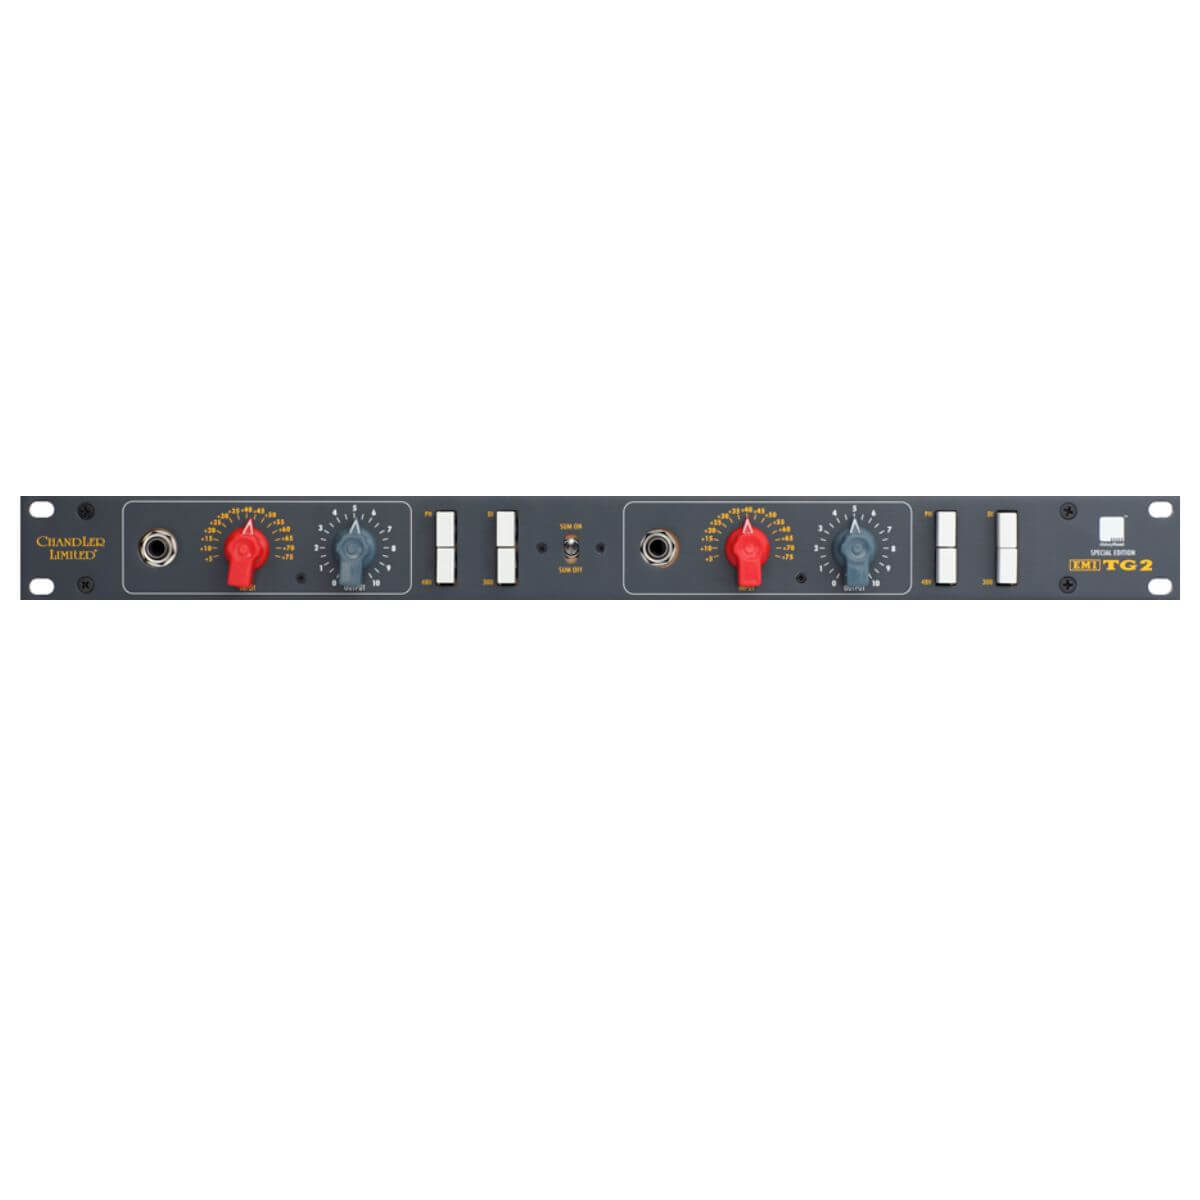 EMI Abbey Road Series, Rackmount And Mics TG2 PREAMP DI